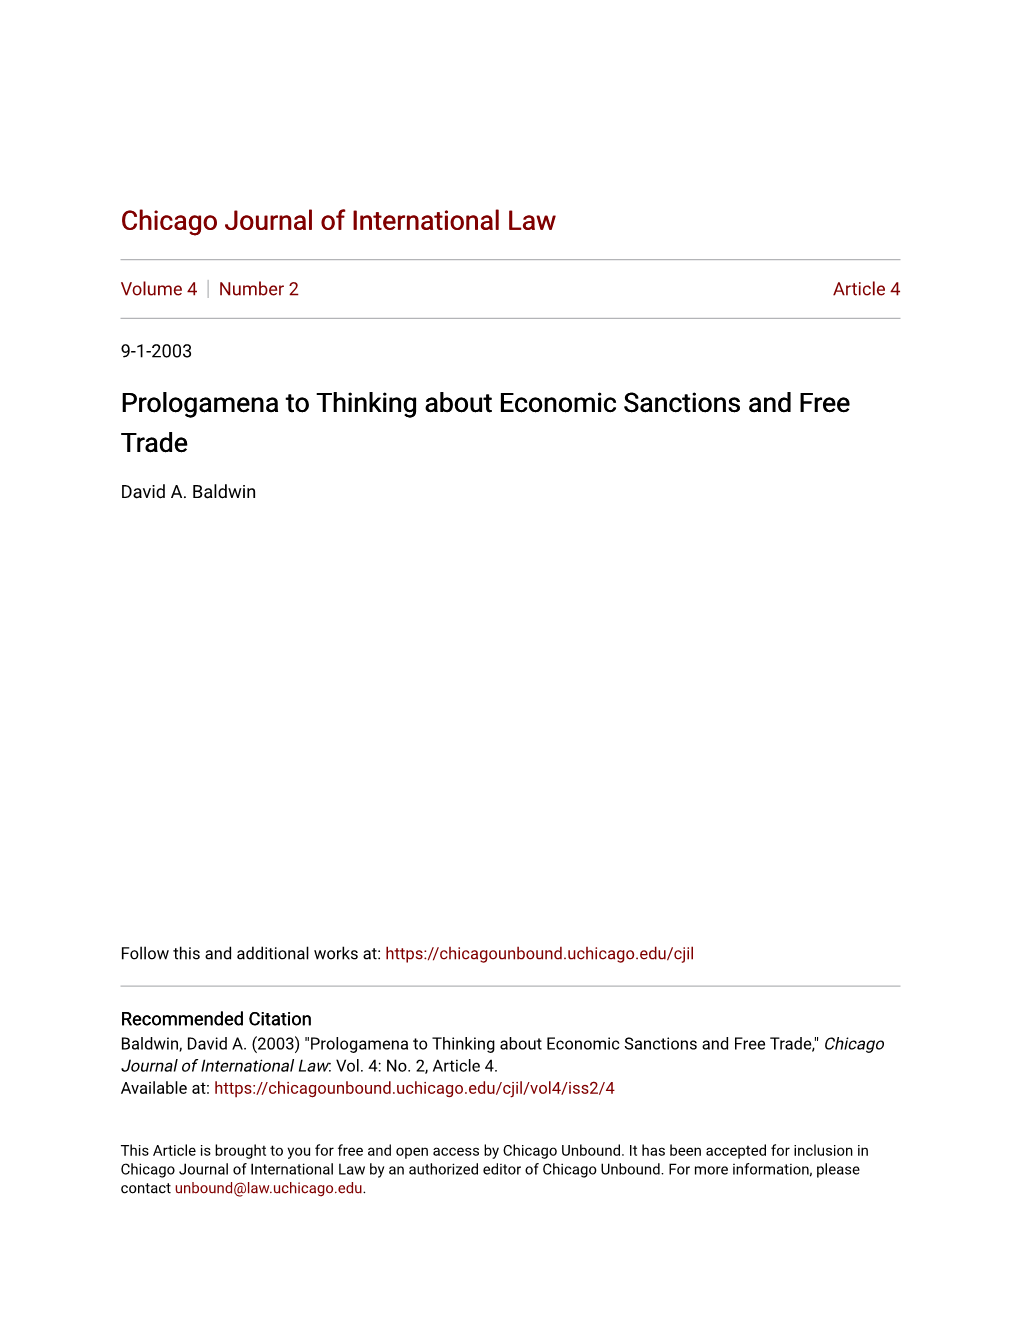 Prologamena to Thinking About Economic Sanctions and Free Trade